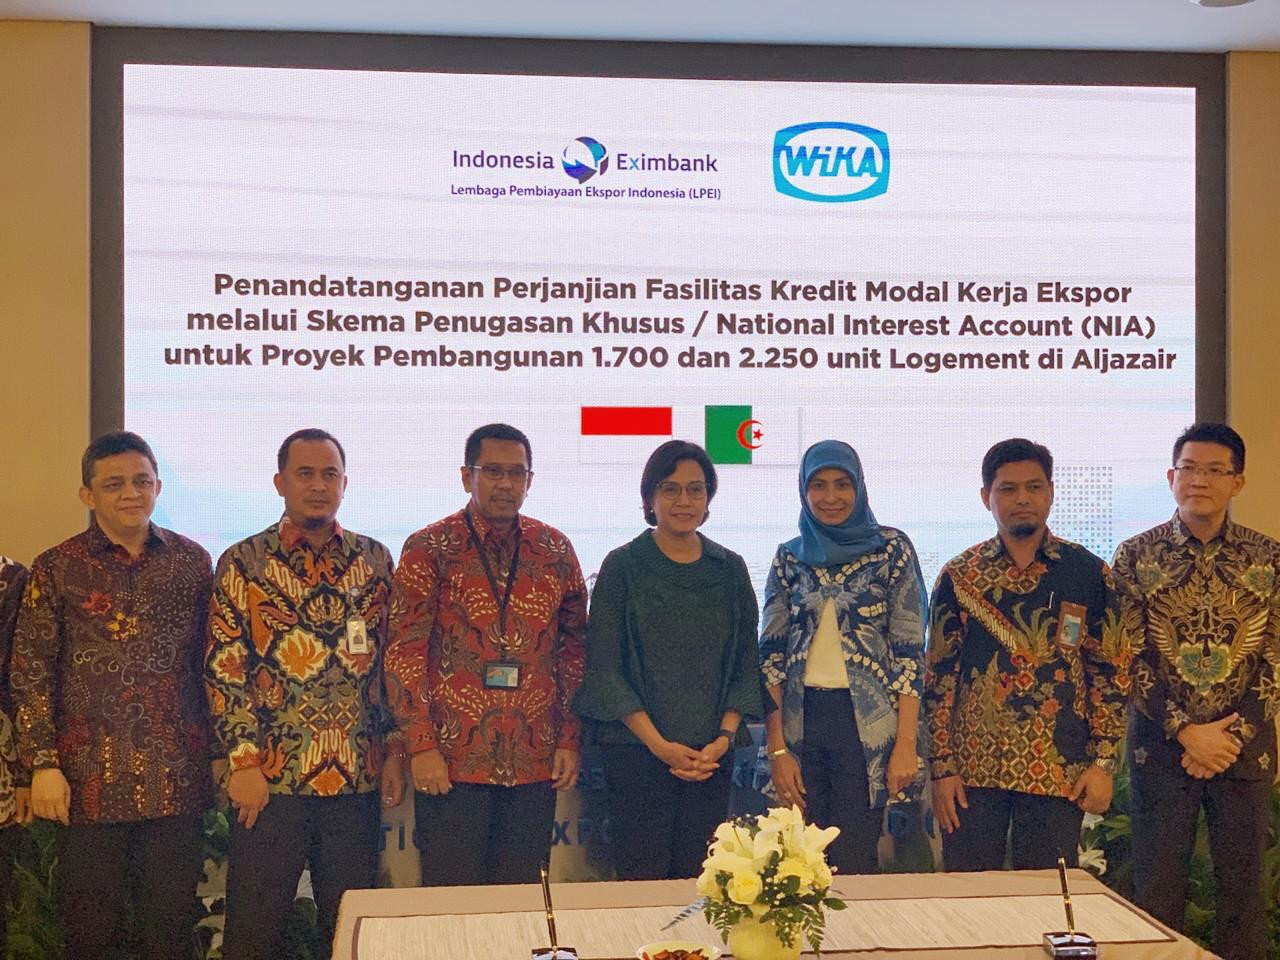 Eximbank - WIKA Agrees on Export Financing Cooperation for Foreign Project Development Image